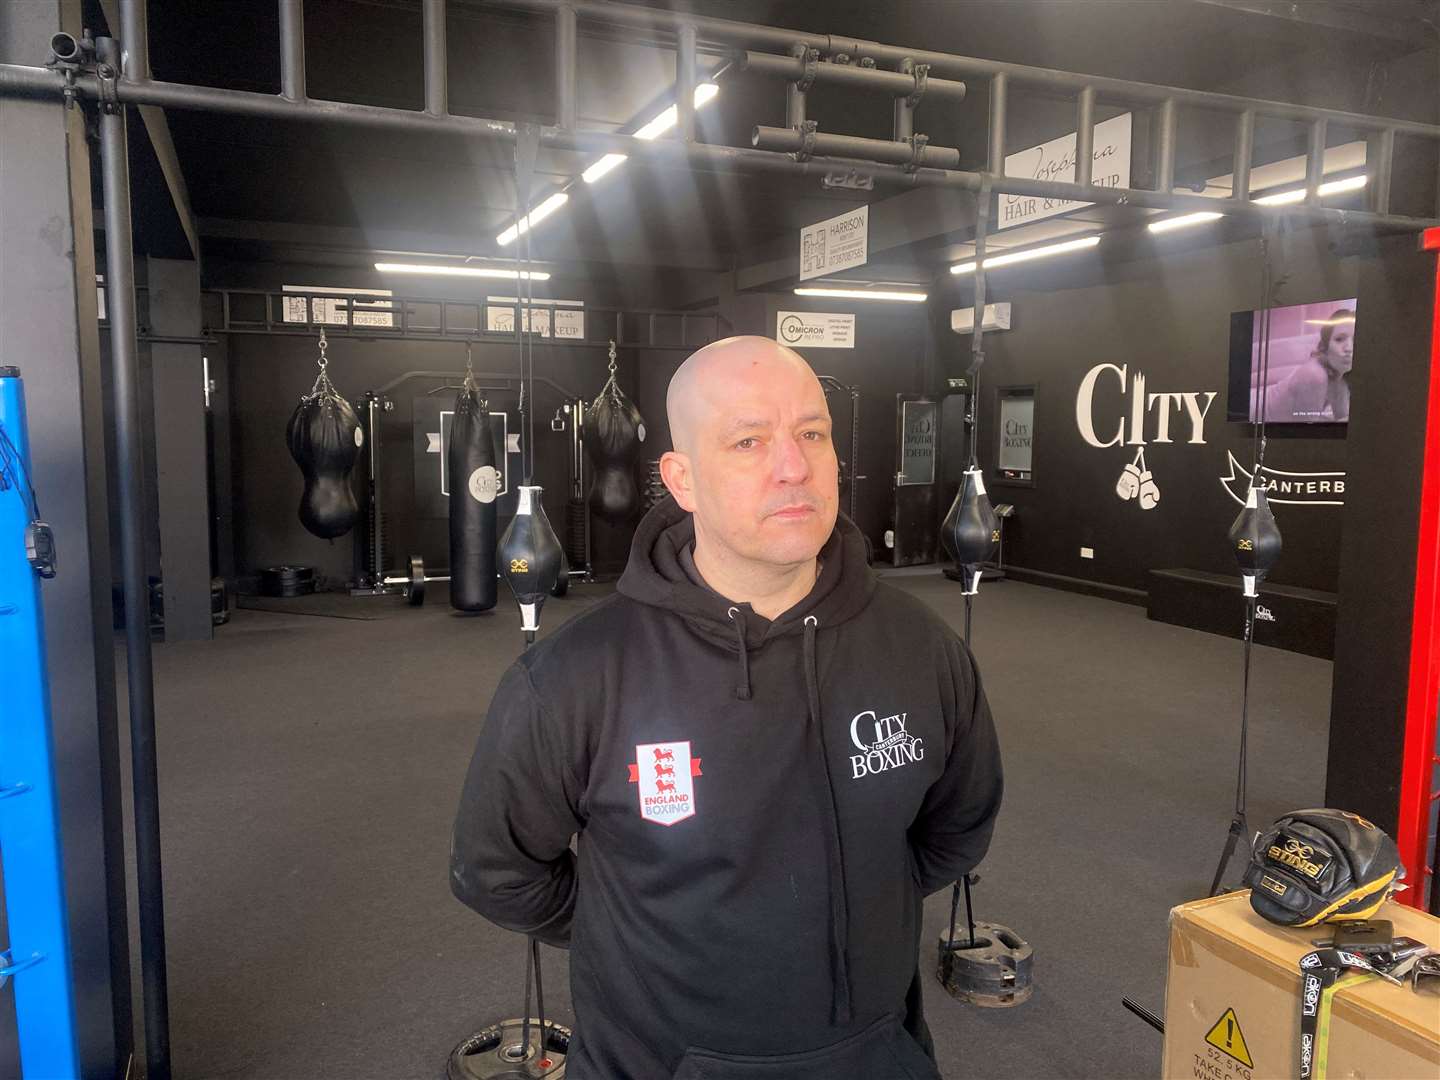 Oli Nonis supports City Boxing in Canterbury with the aim of positively influencing local youngsters